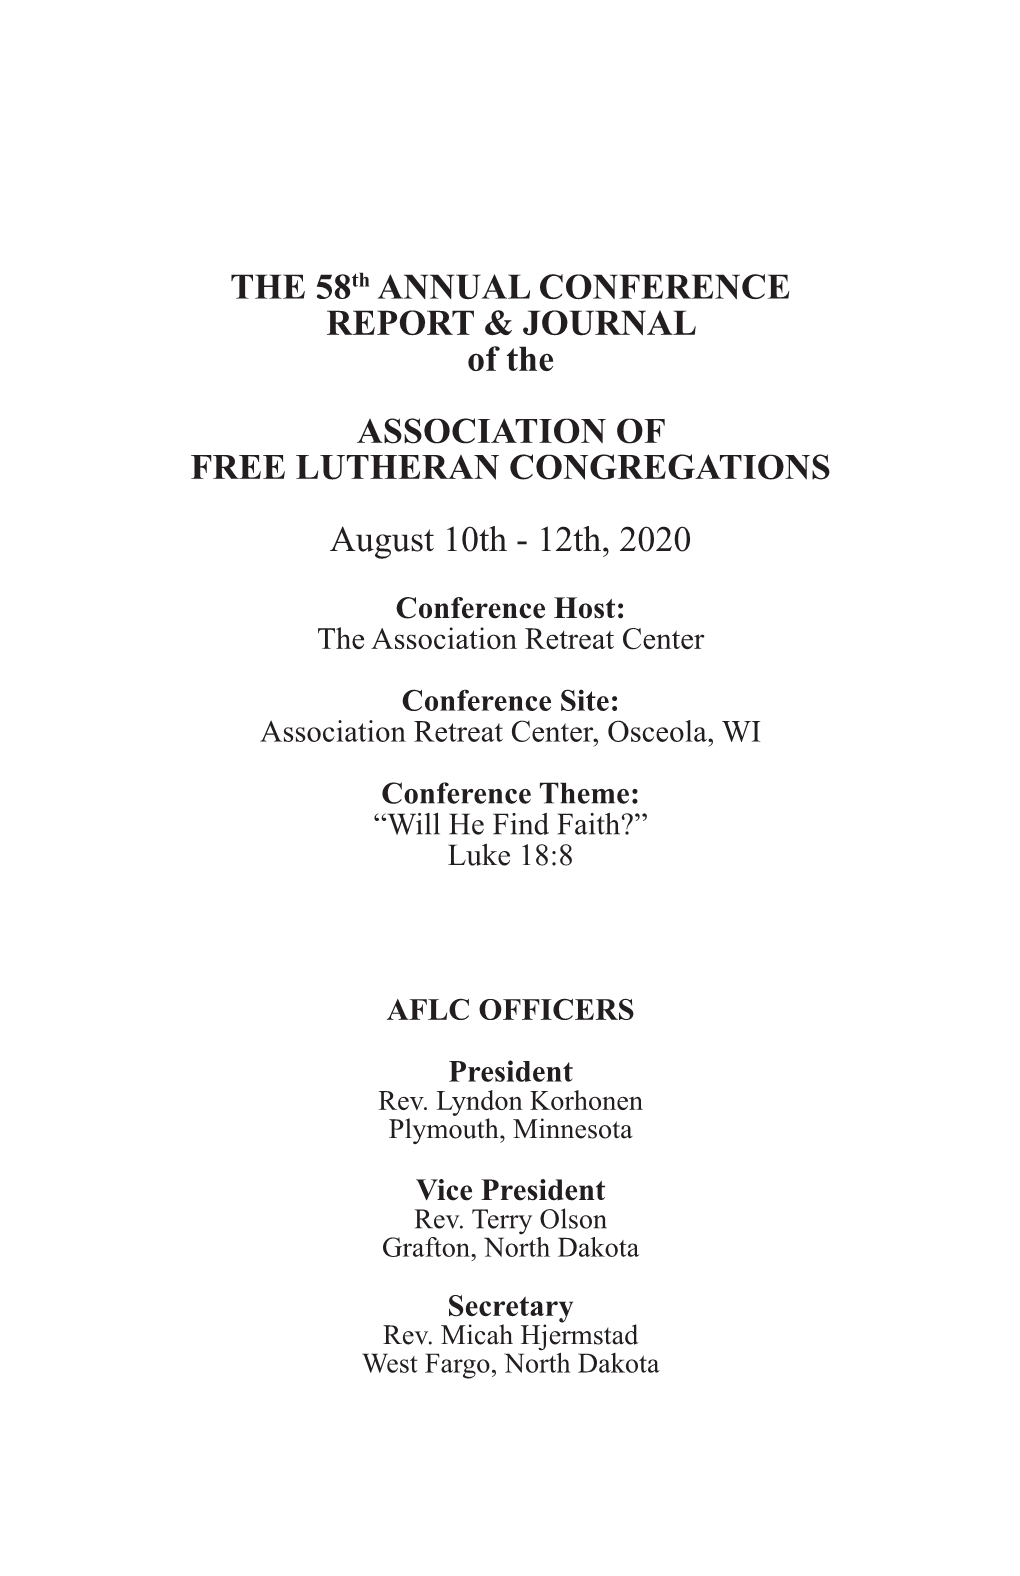 THE 58Th ANNUAL CONFERENCE REPORT & JOURNAL of the ASSOCIATION of FREE LUTHERAN CONGREGATIONS August 10Th